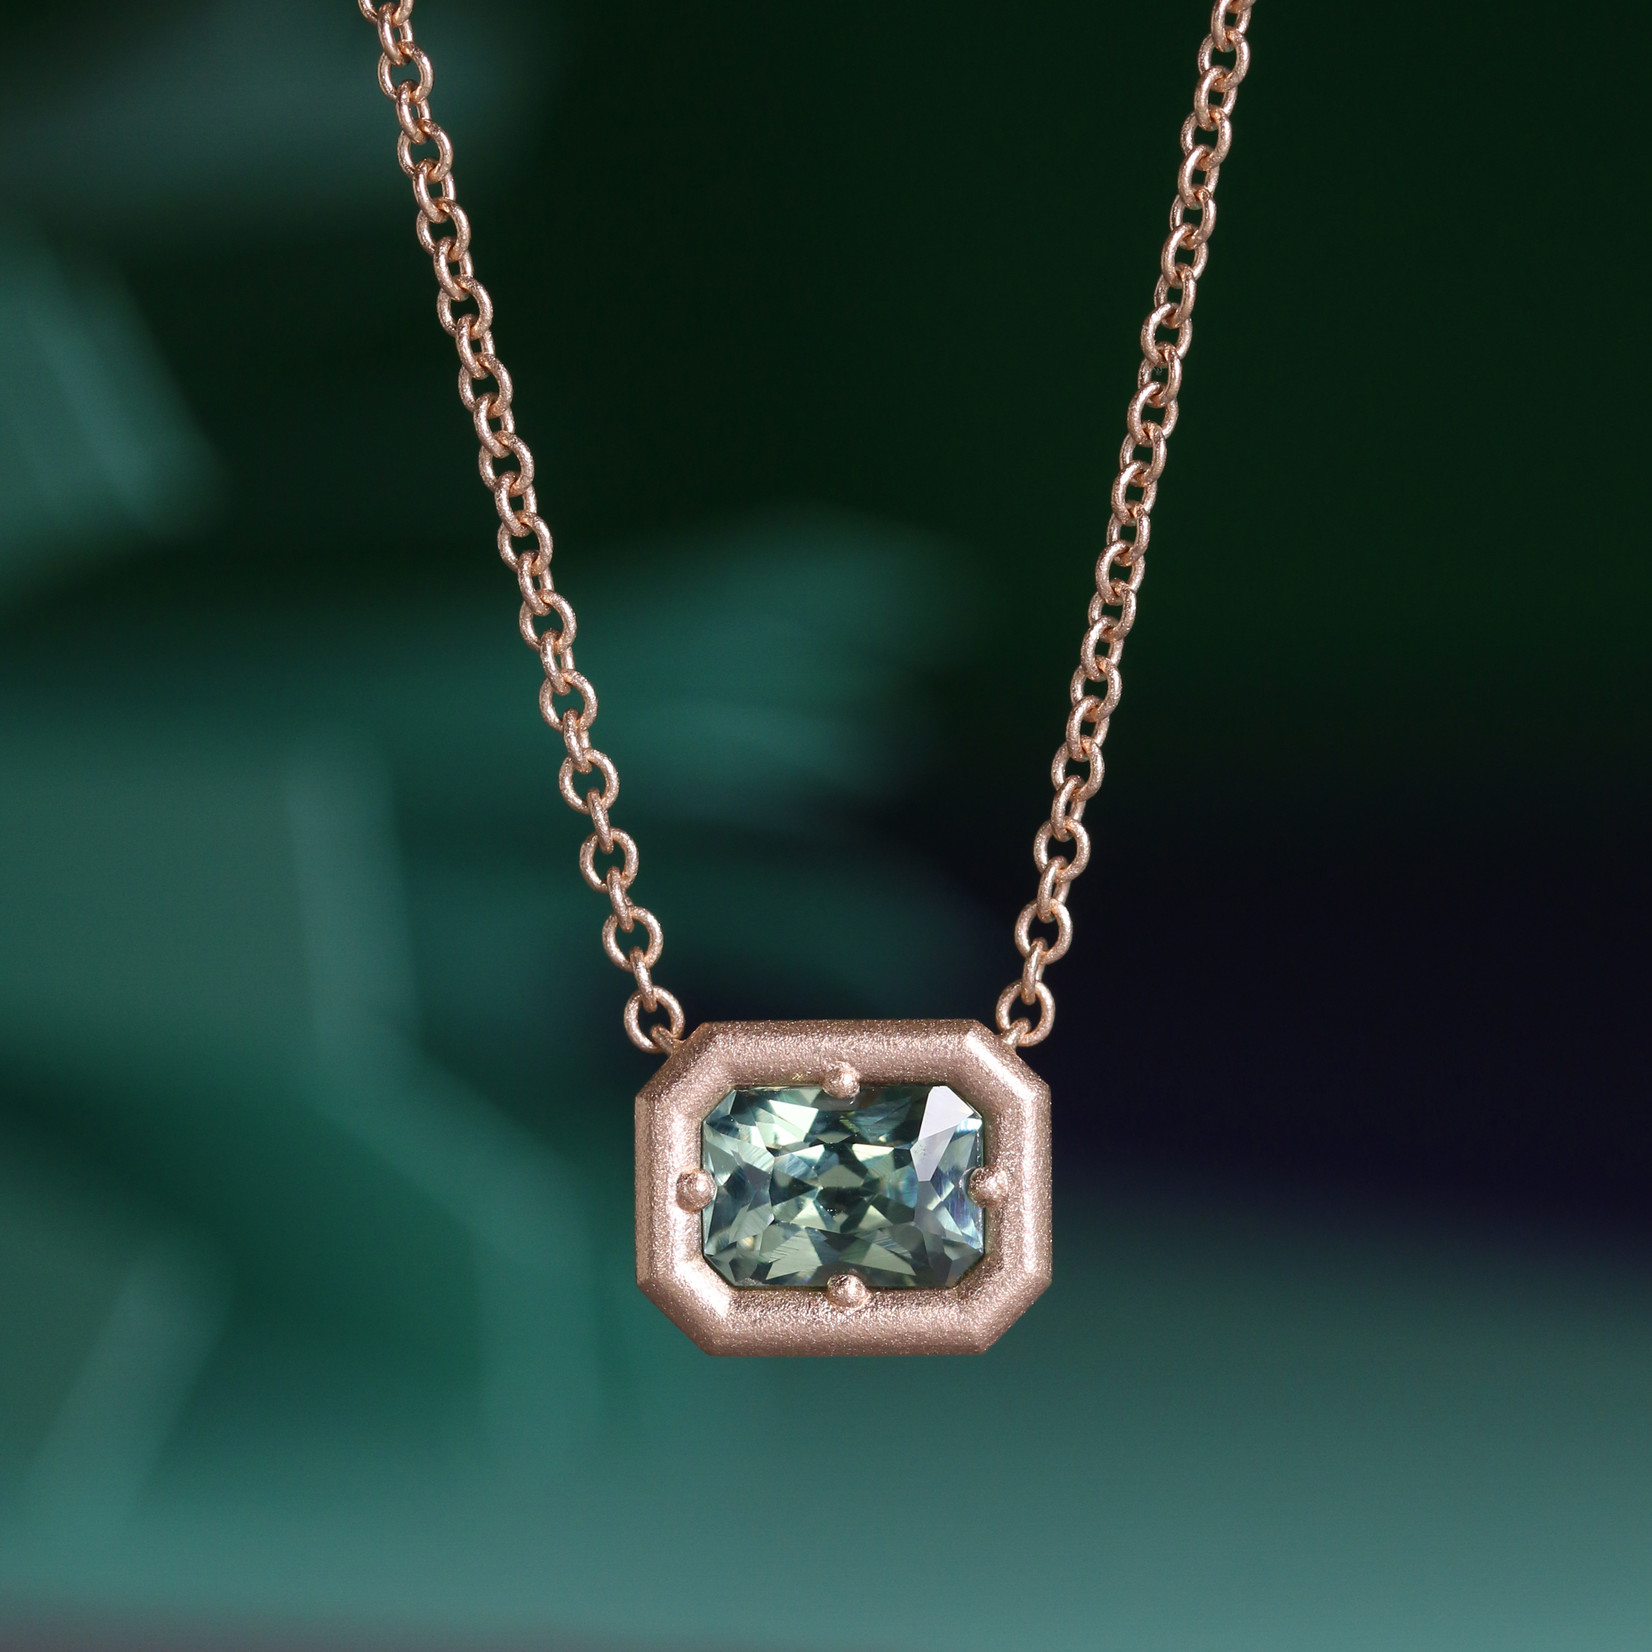 Baxter Moerman Anika Necklace with Teal Sapphirein Rose Gold